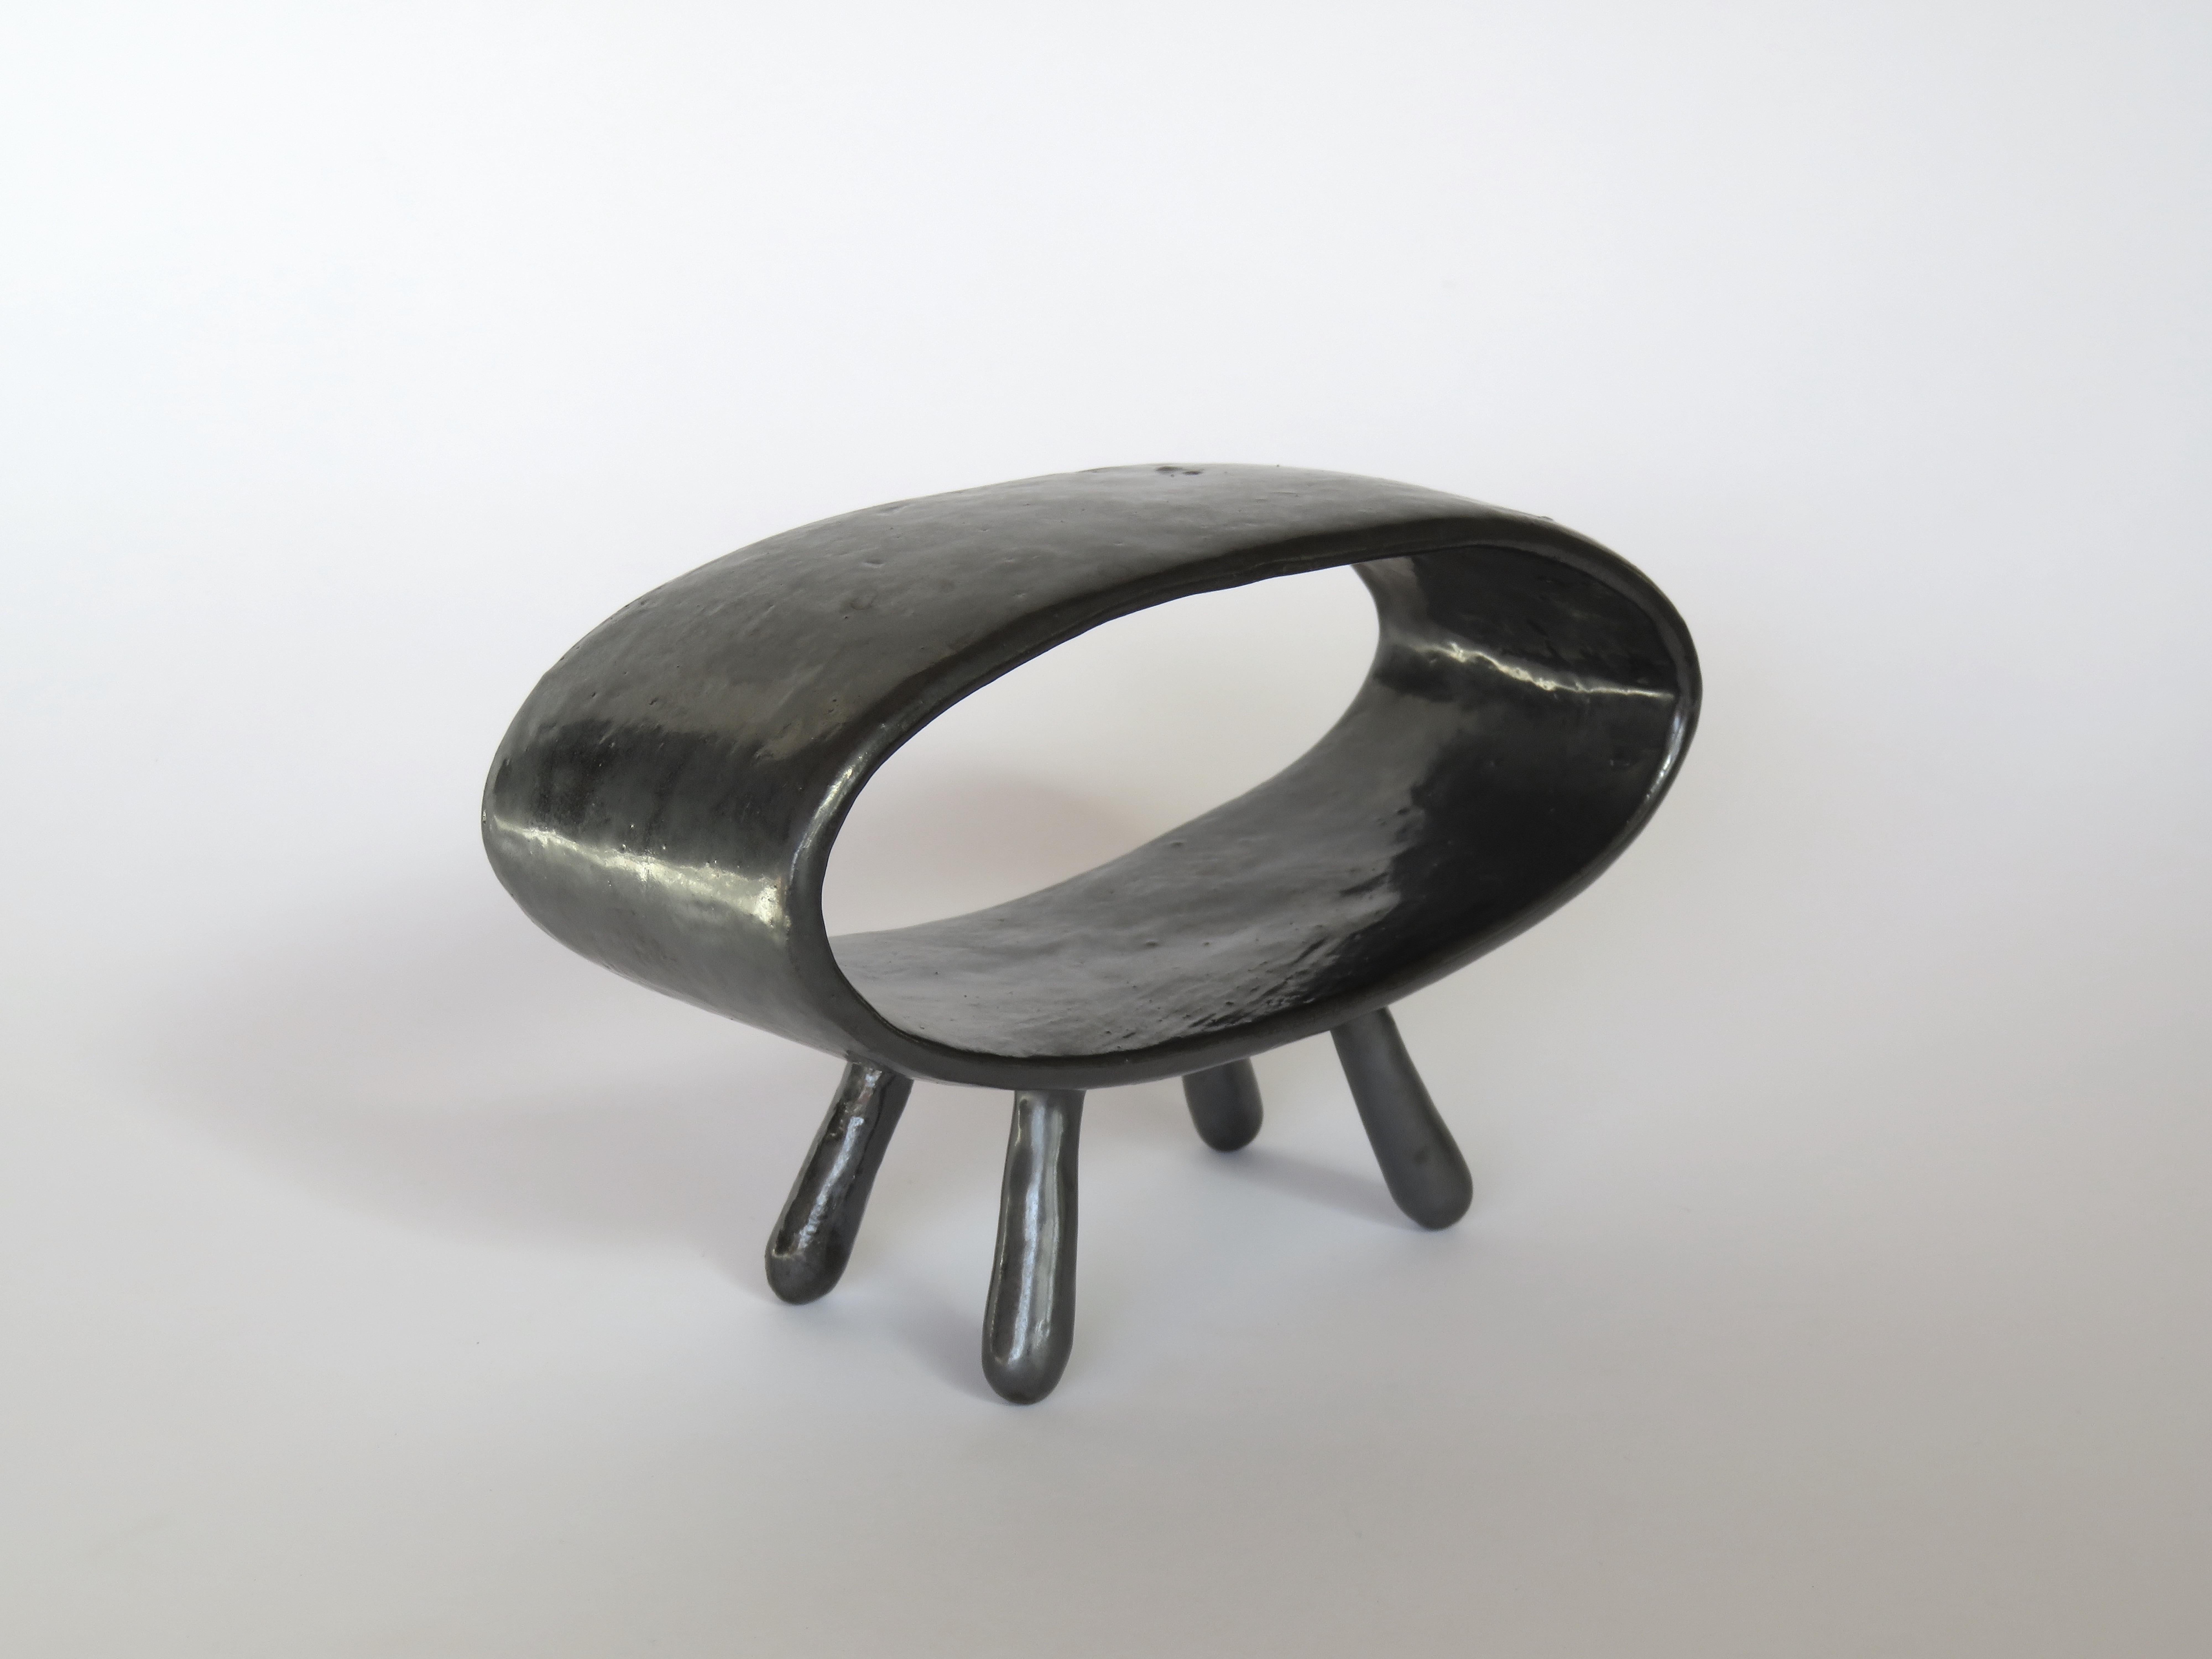 American Metallic Black Ceramic Sculpture, Hollow Pointed Oval on 4 Legs, Hand Built